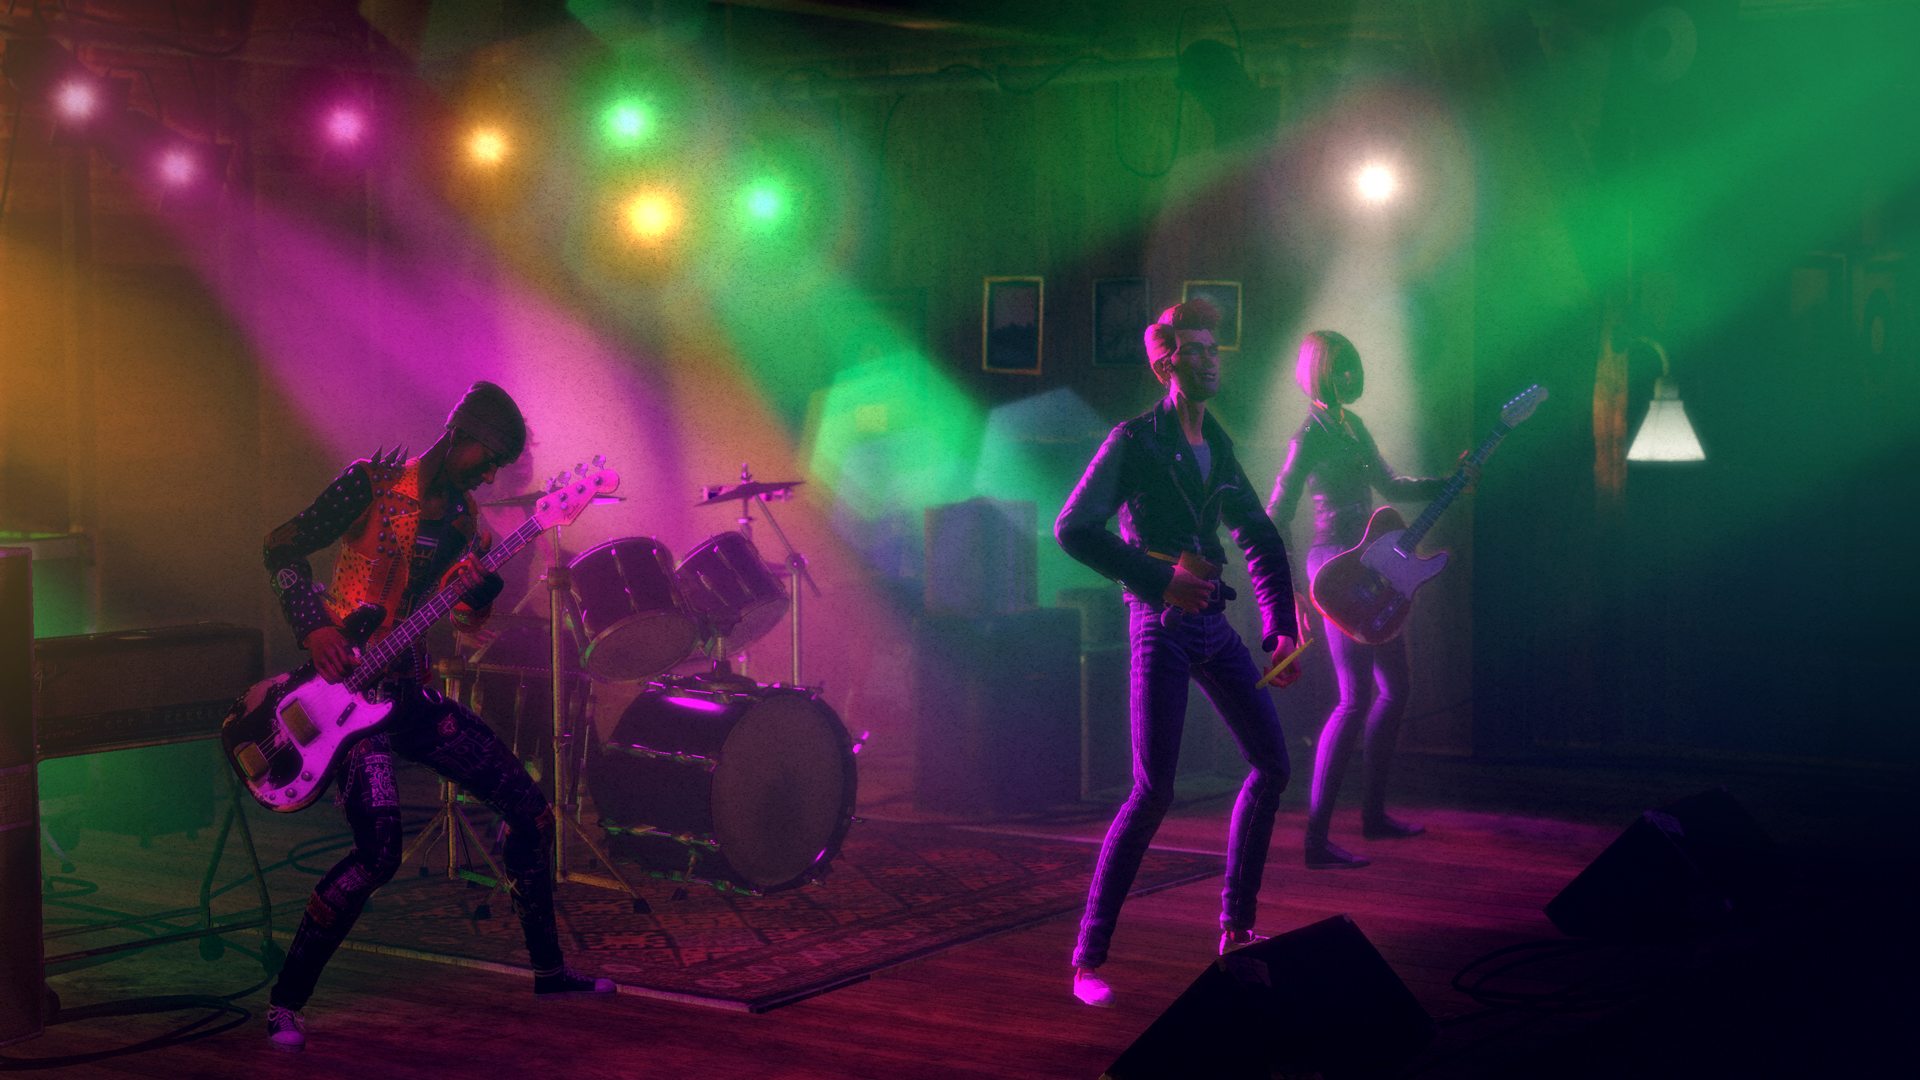 Rock Band 4 - New 80s Tracks from Depeche Mode, INXS, and 